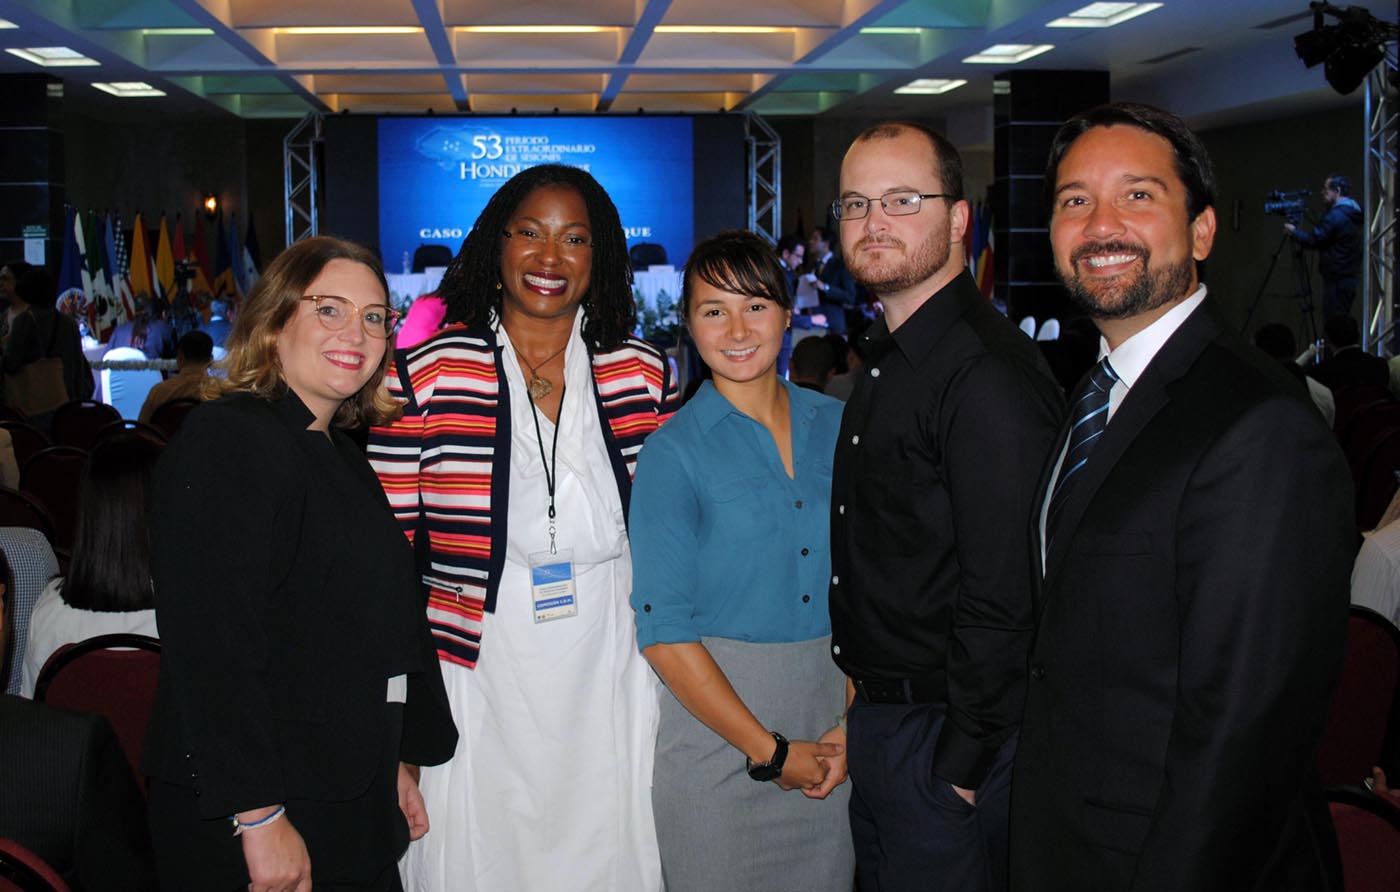 IHRC students Allison Pruitt, Forest Miles, and Erica Sutter, and IHRC Director Francisco J. Rivera Juaristi, with Commissioner Tracy Robinson, Rapporteur on the Rights of LGBTI Persons at the Inter-American Commission on Human Rights. 